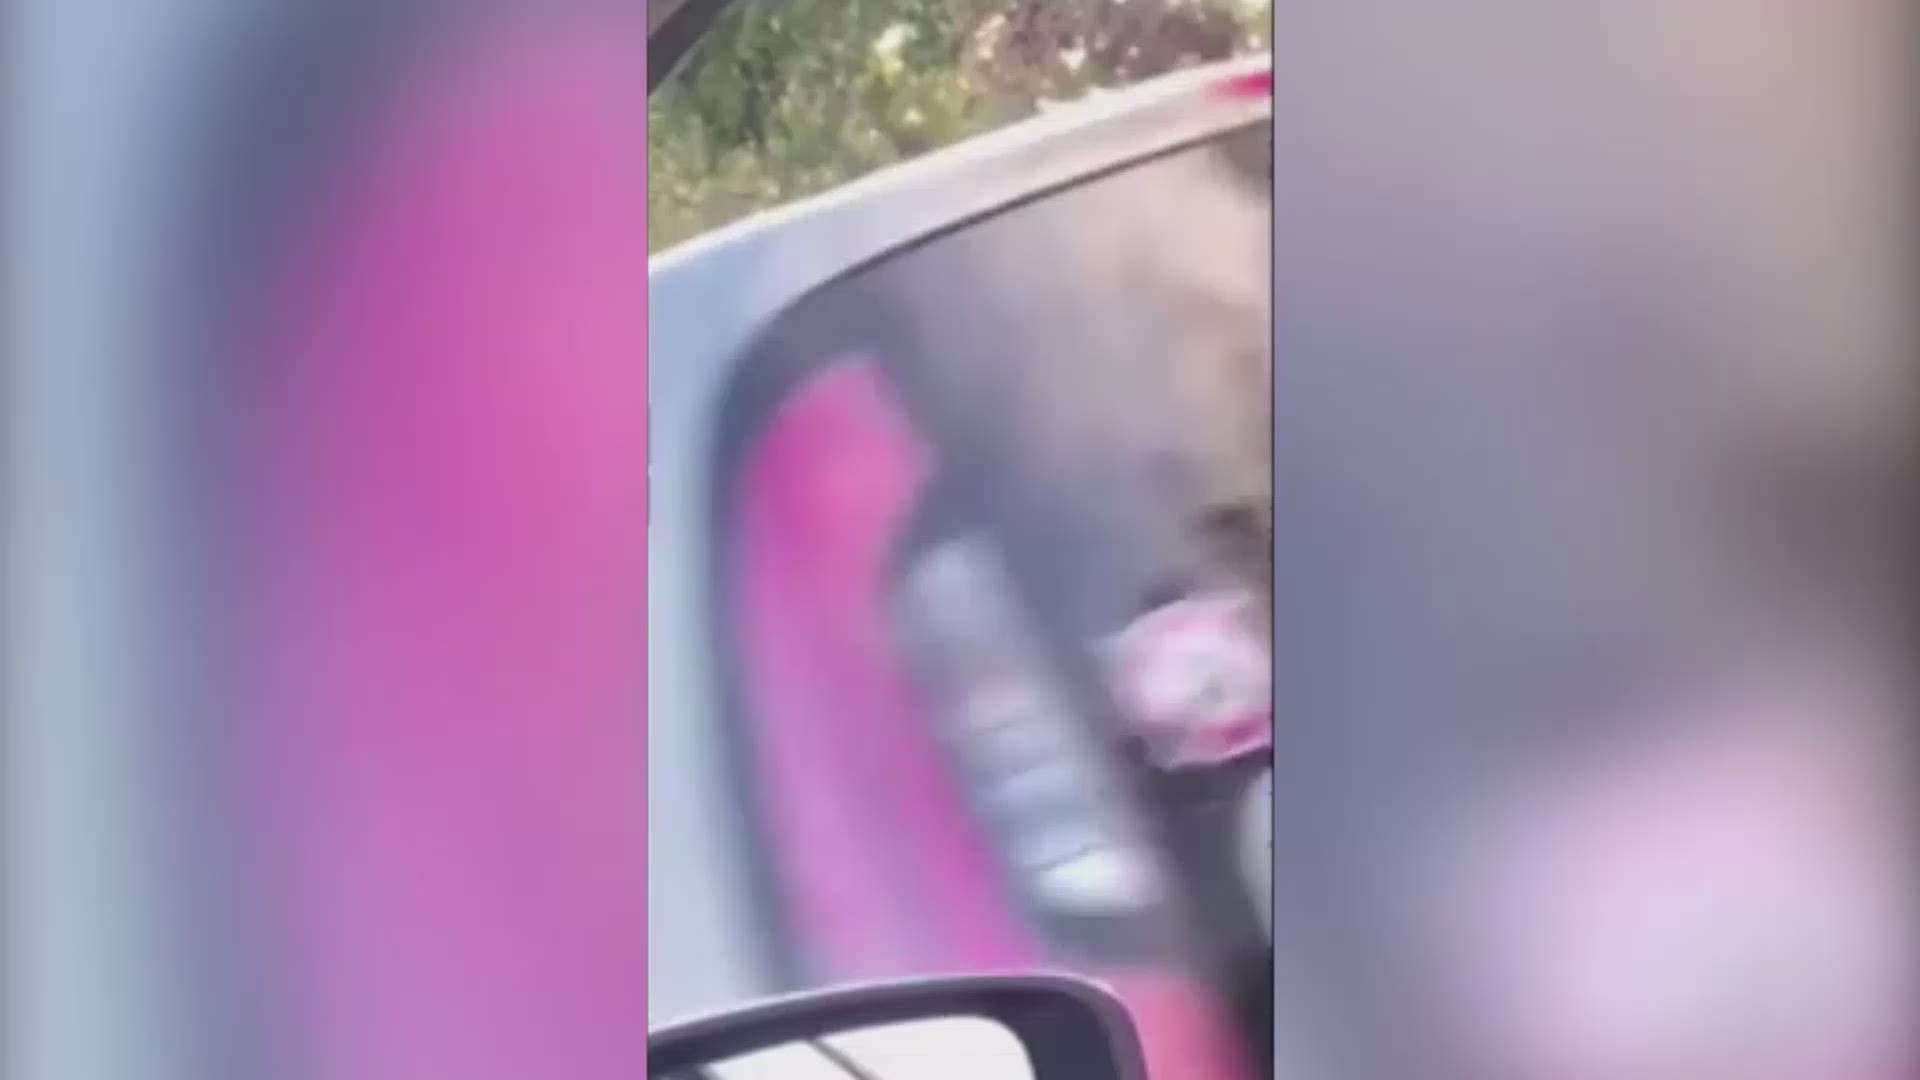 Cell phone video shows a young girl imitating her parents and getting out of a vehicle with her arms raised after police pulled over the pick-up truck in which she was riding.